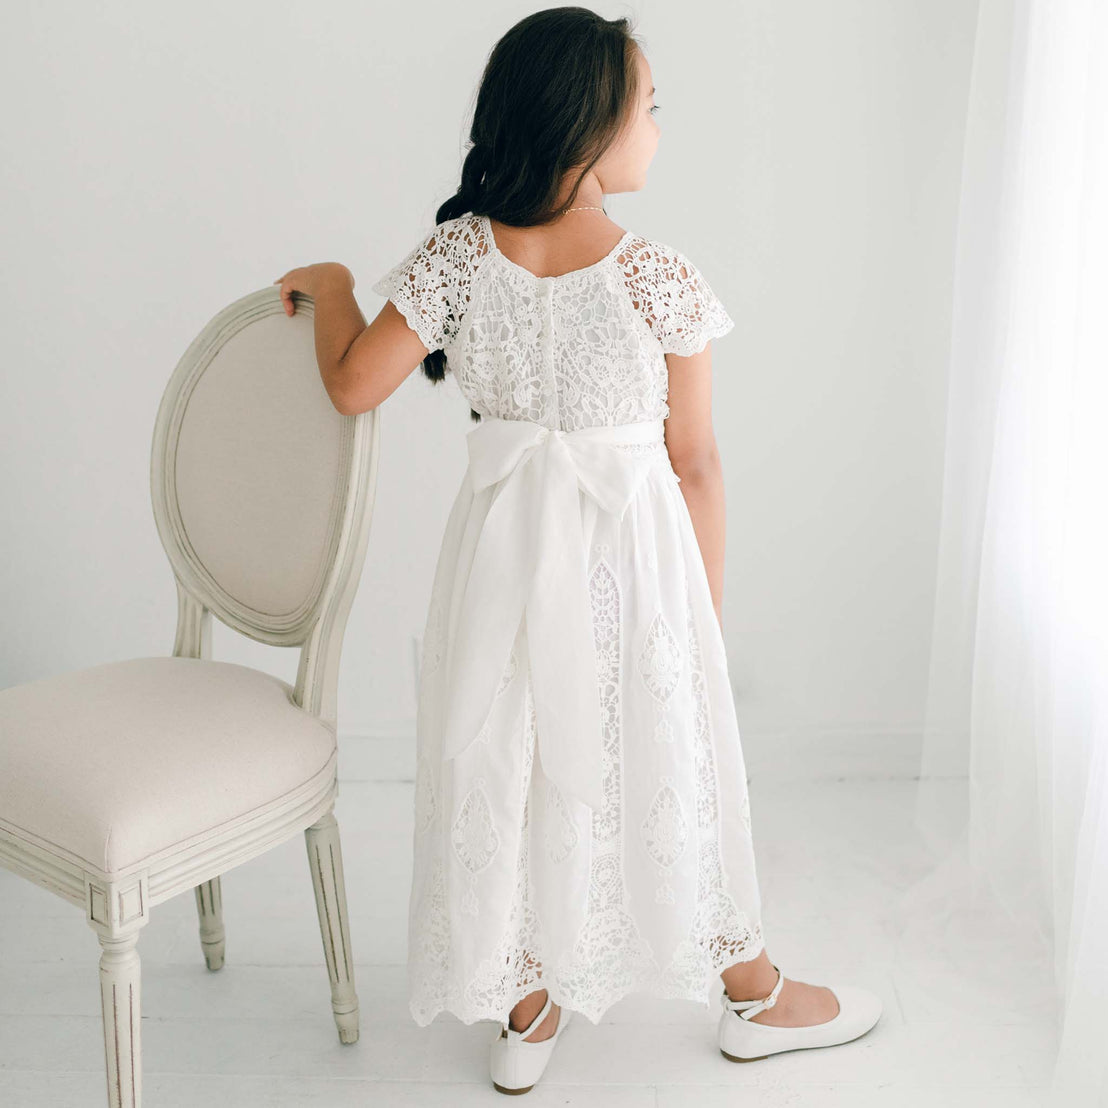 A young girl in a white Grace Girls Lace Dress stands next to a beige chair, looking away from the camera.